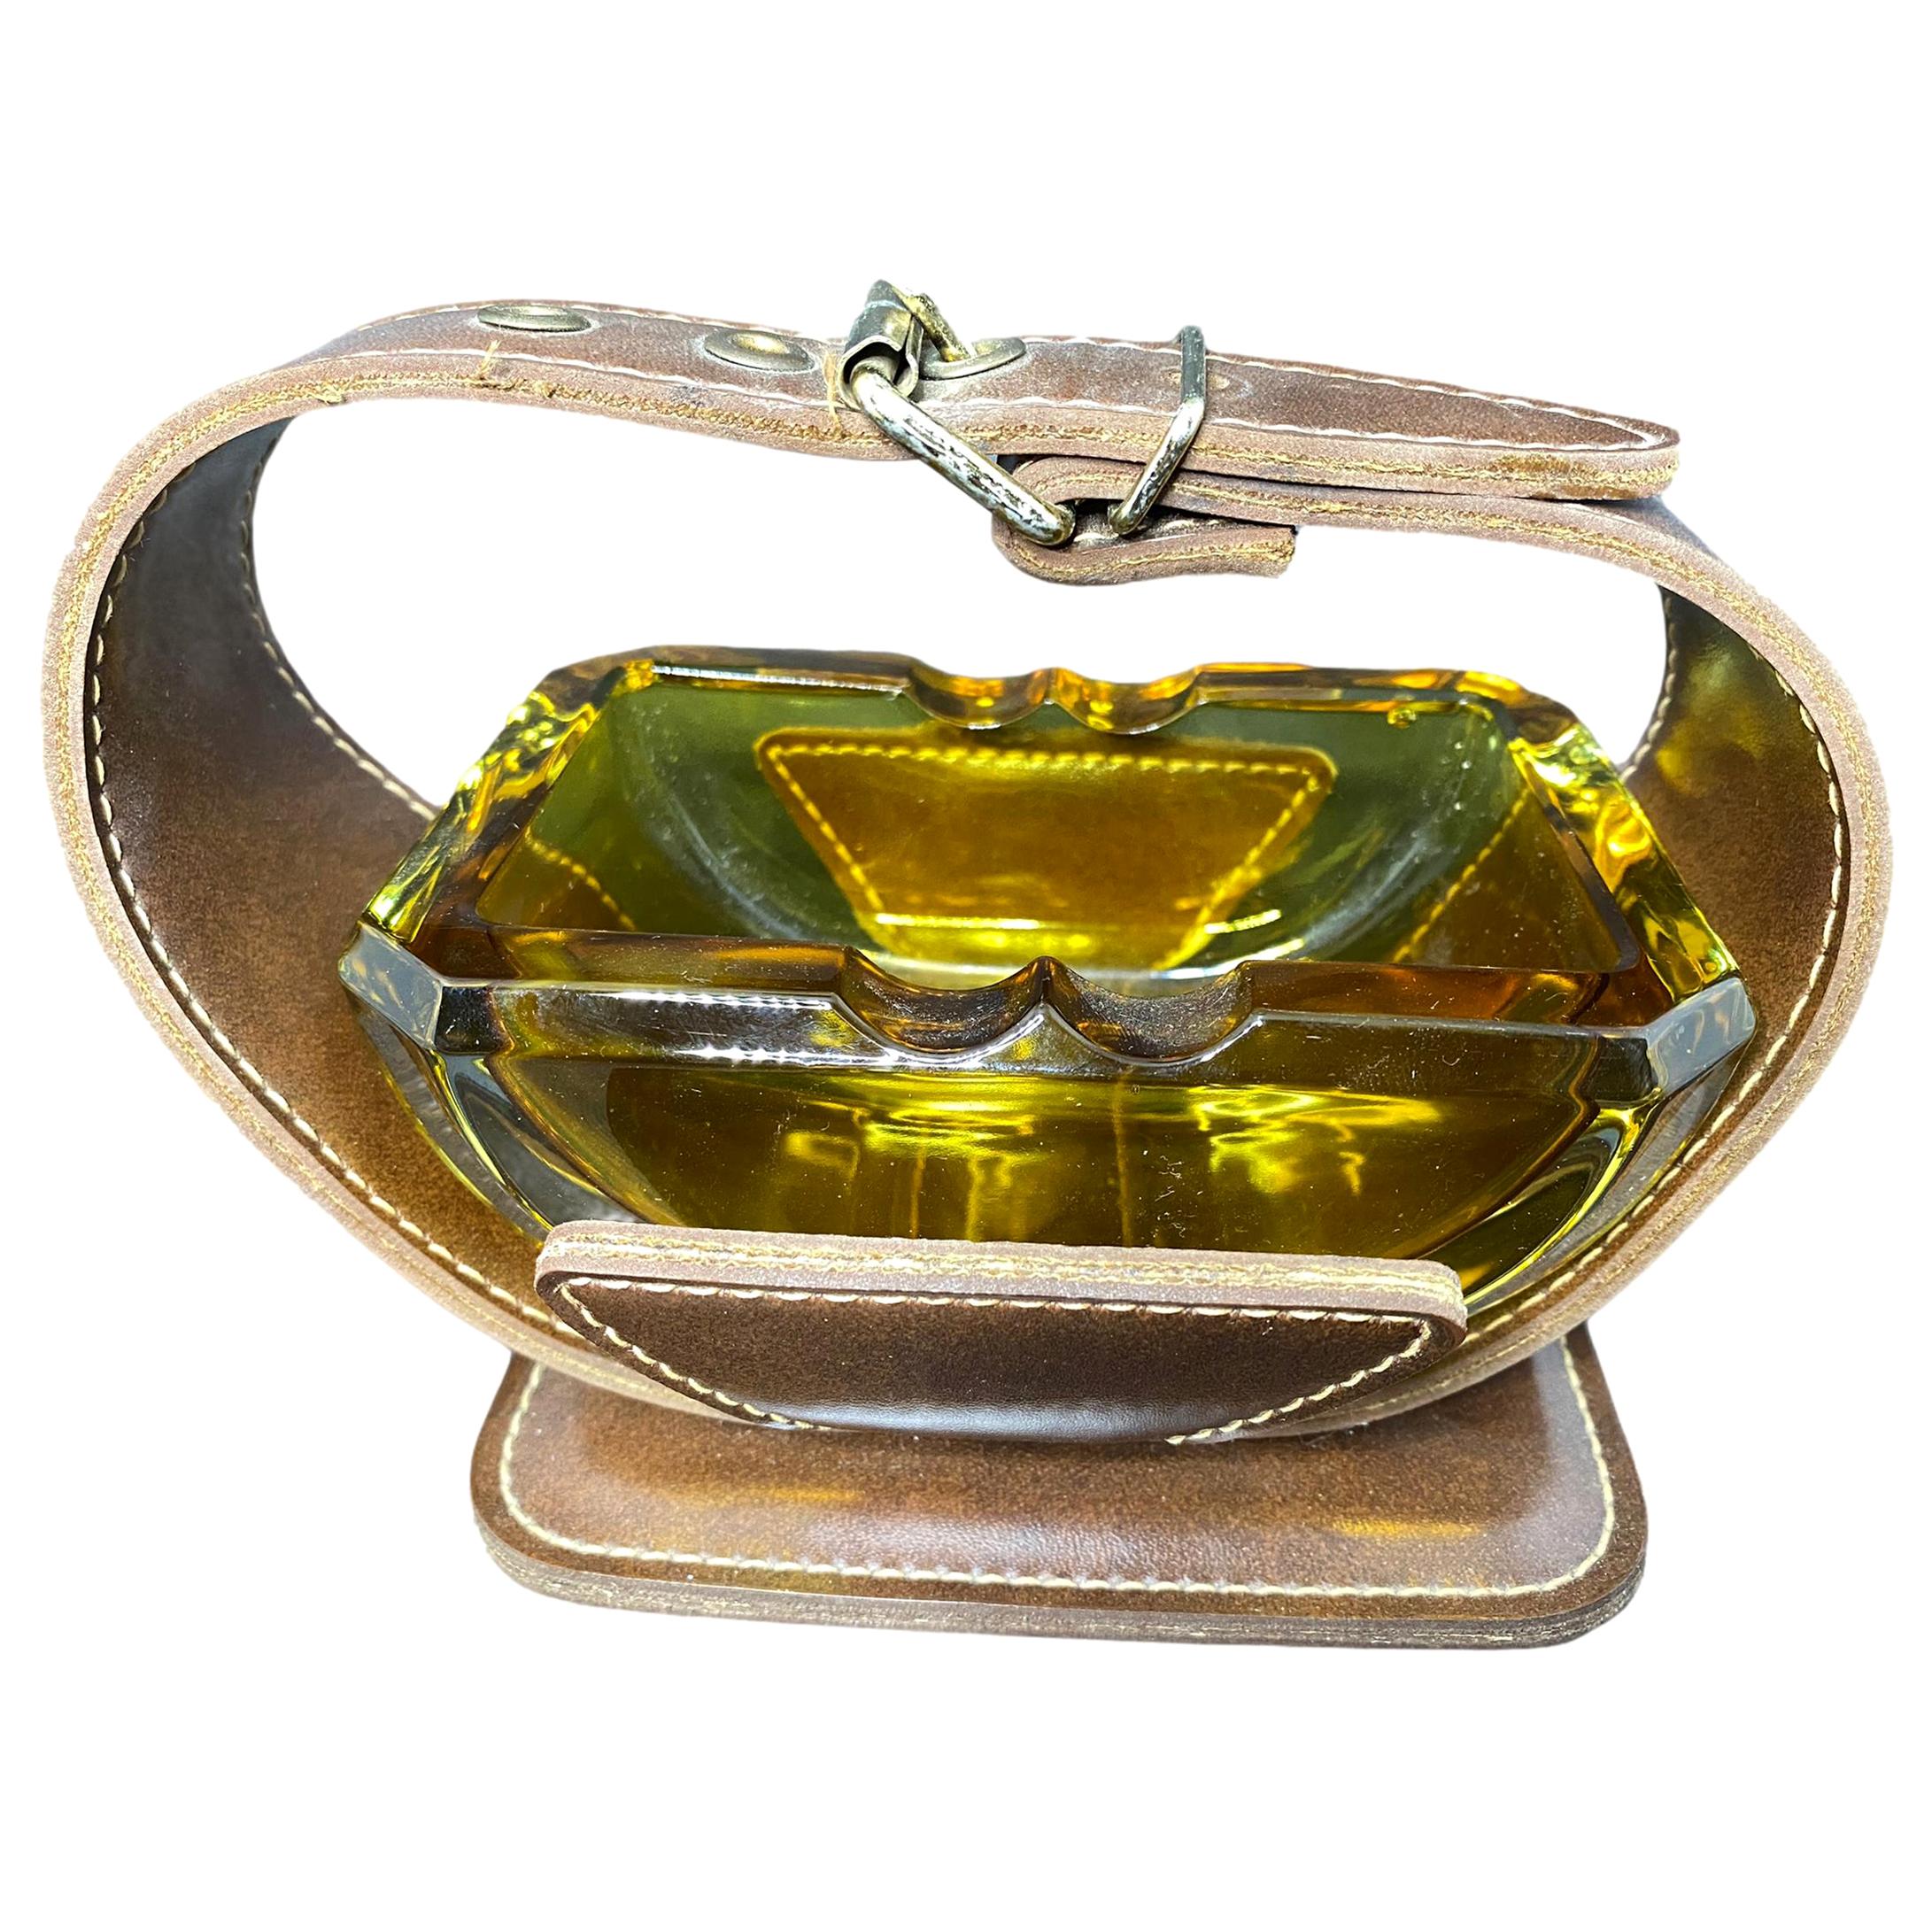 Adnet Style Leatherette and Glass Ashtray Catchall Vintage